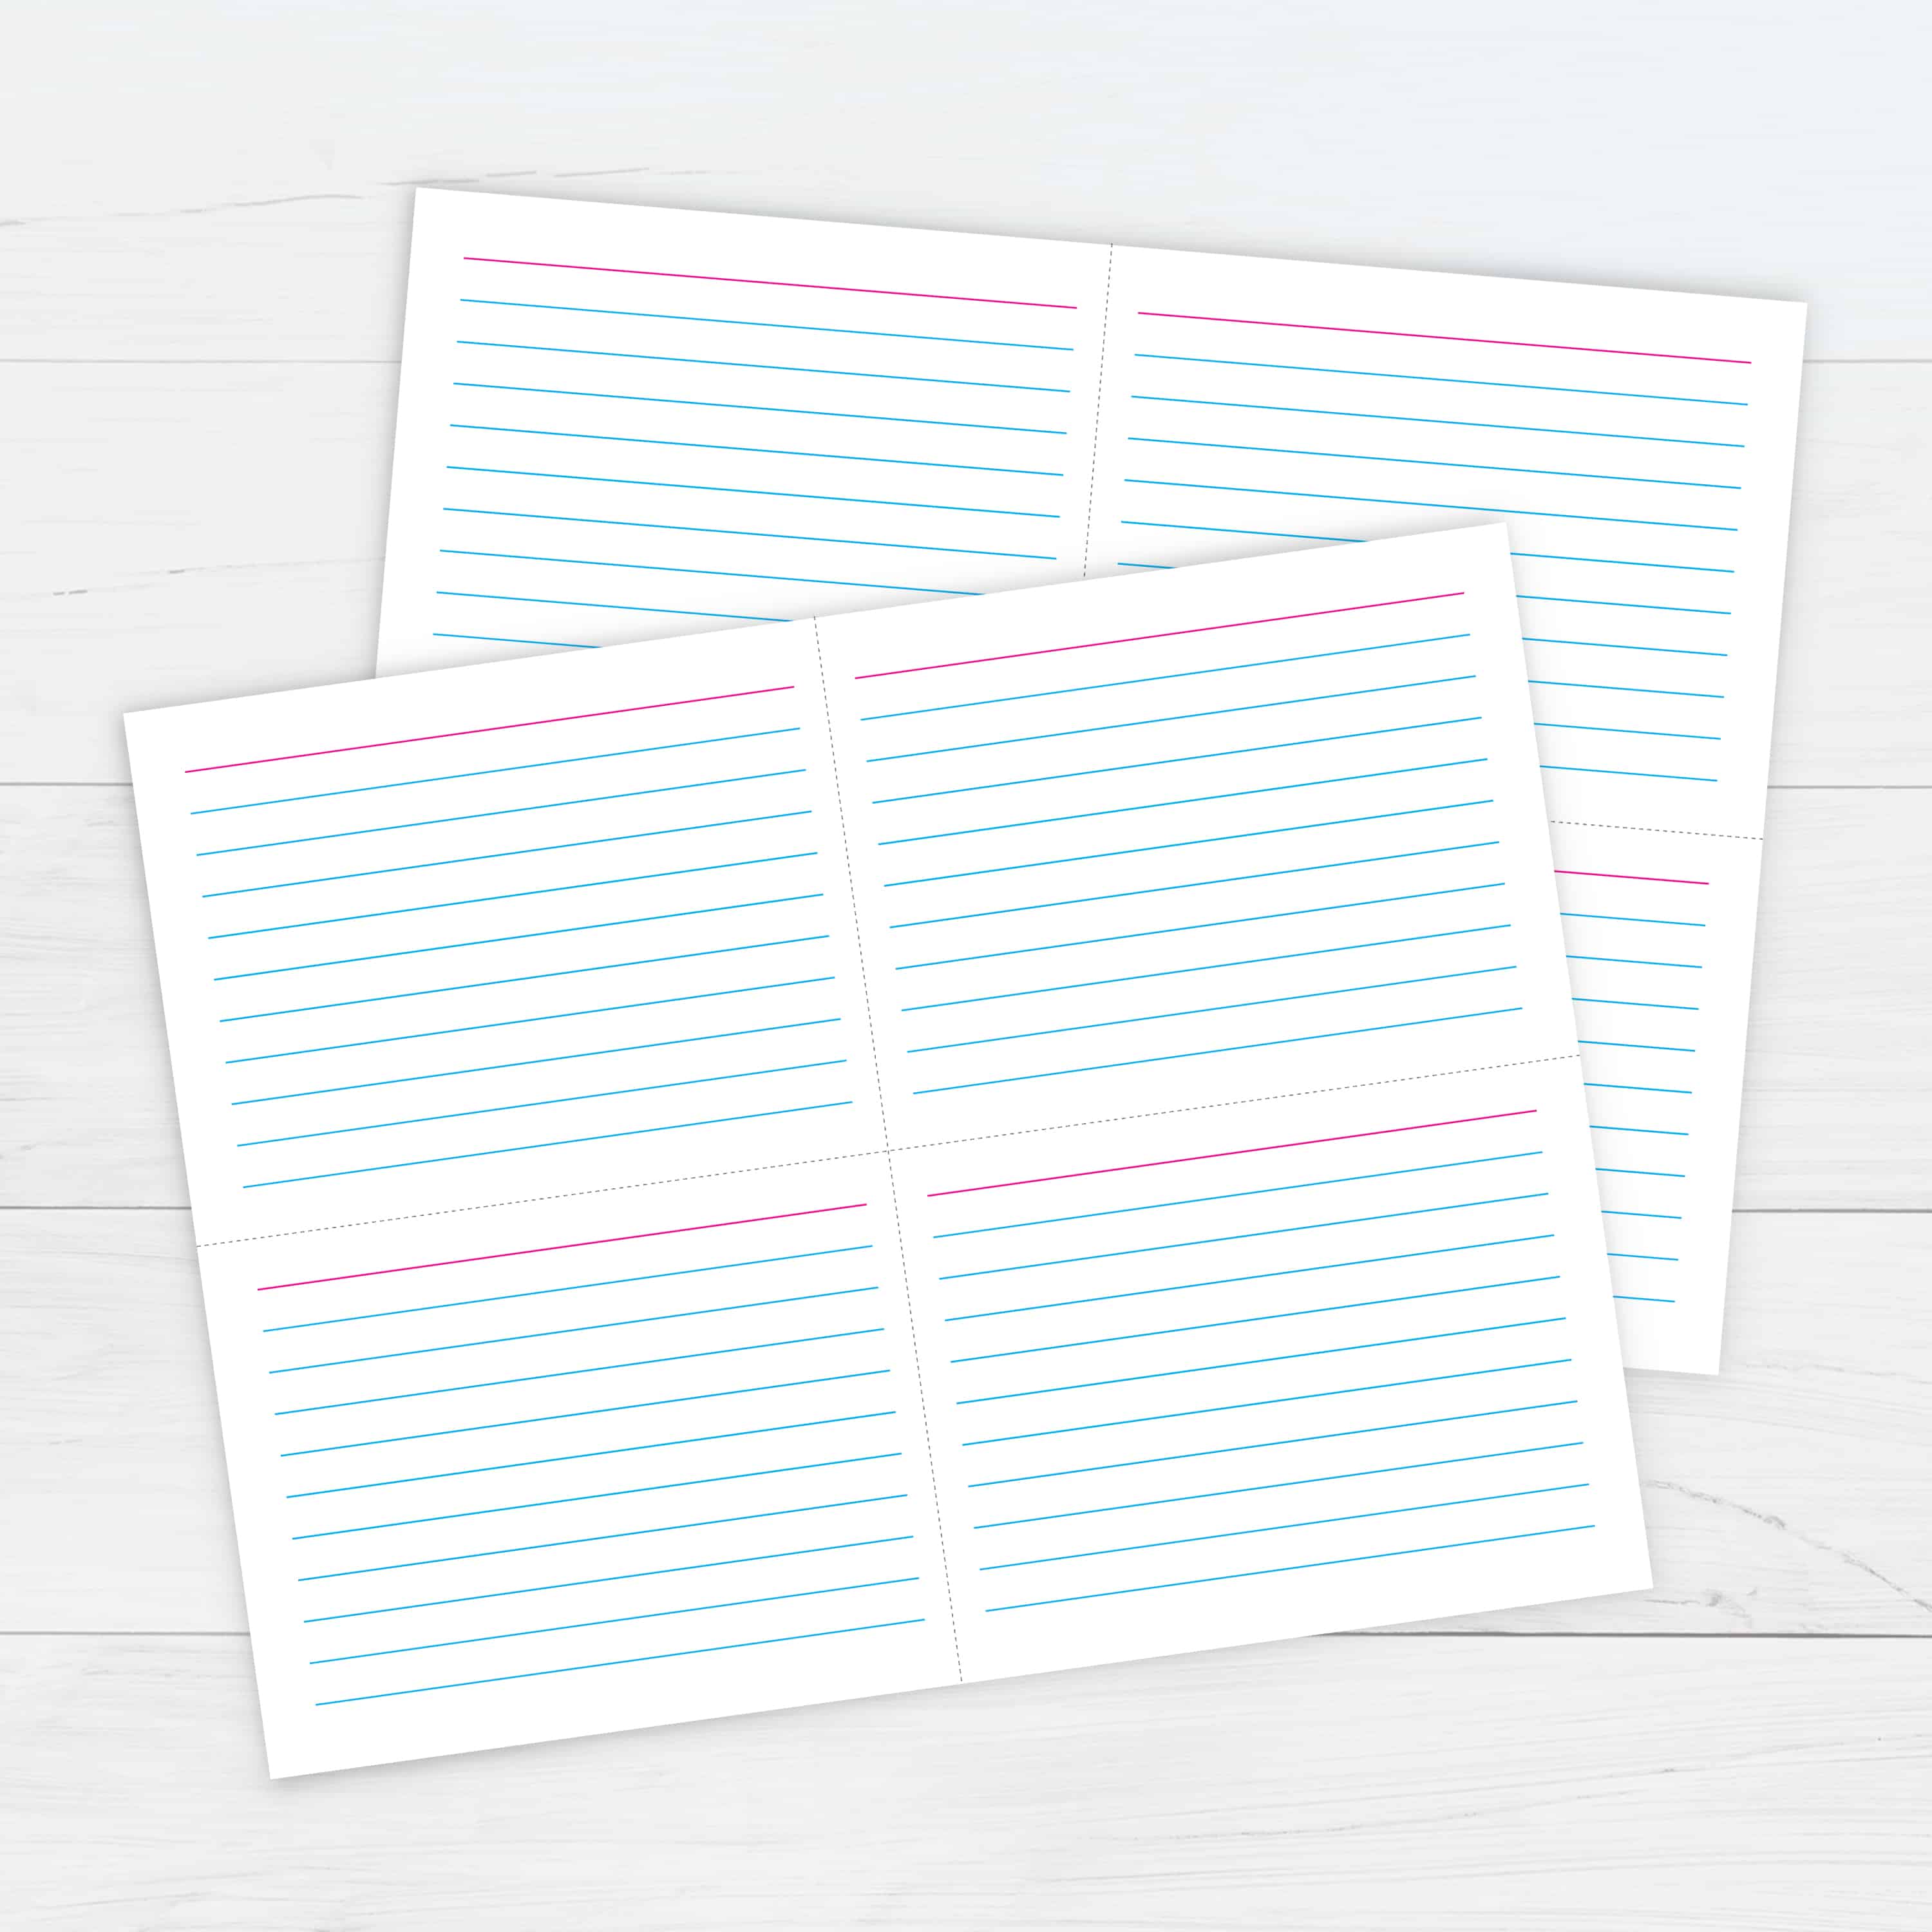 Ruled Index Cards Template - Free Printable Download Throughout Blank Index Card Template